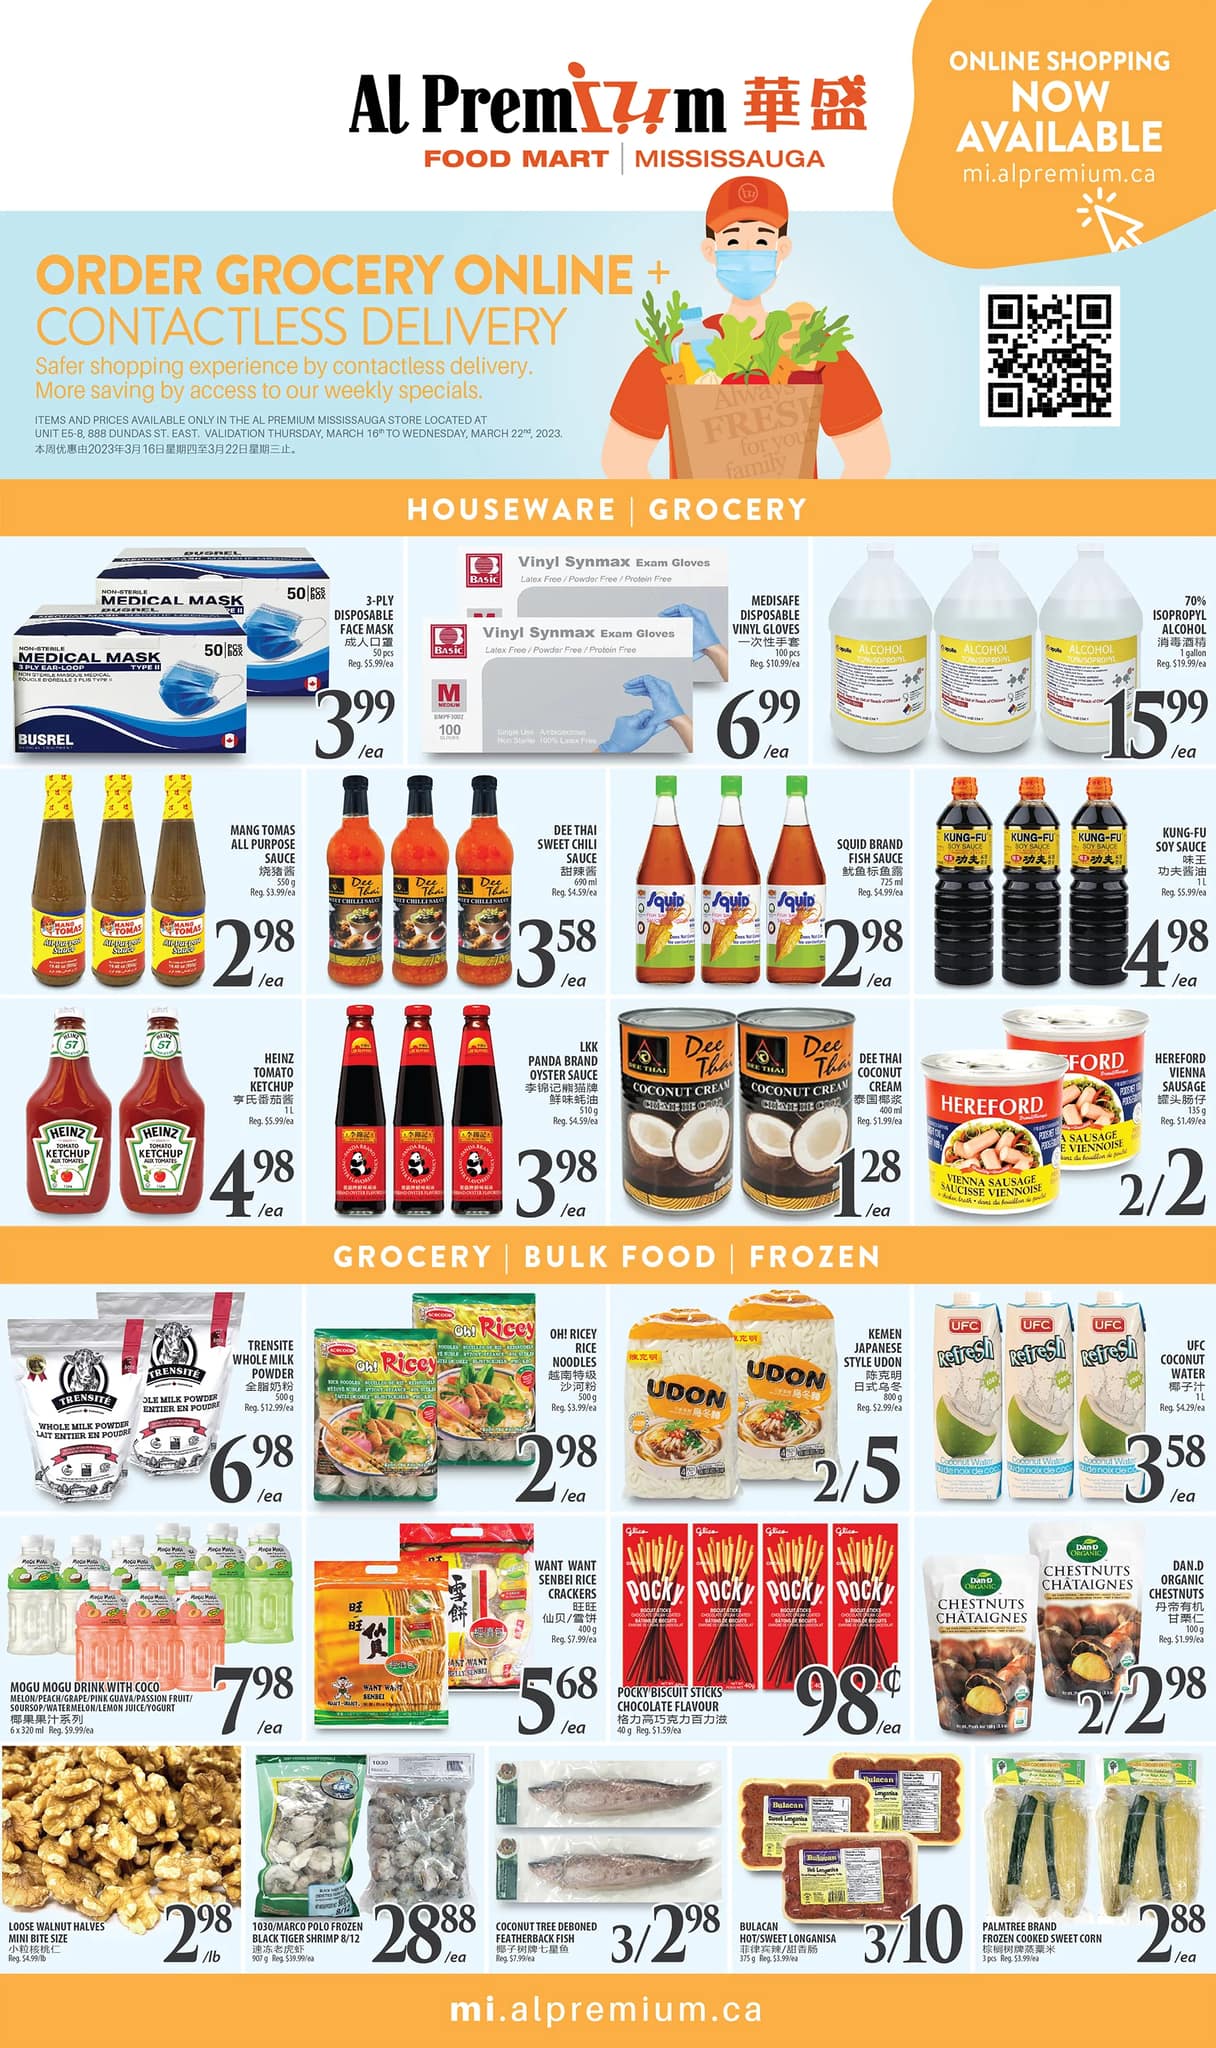 Al Premium - Mississauga Store - Weekly Flyer Specials - Page 3